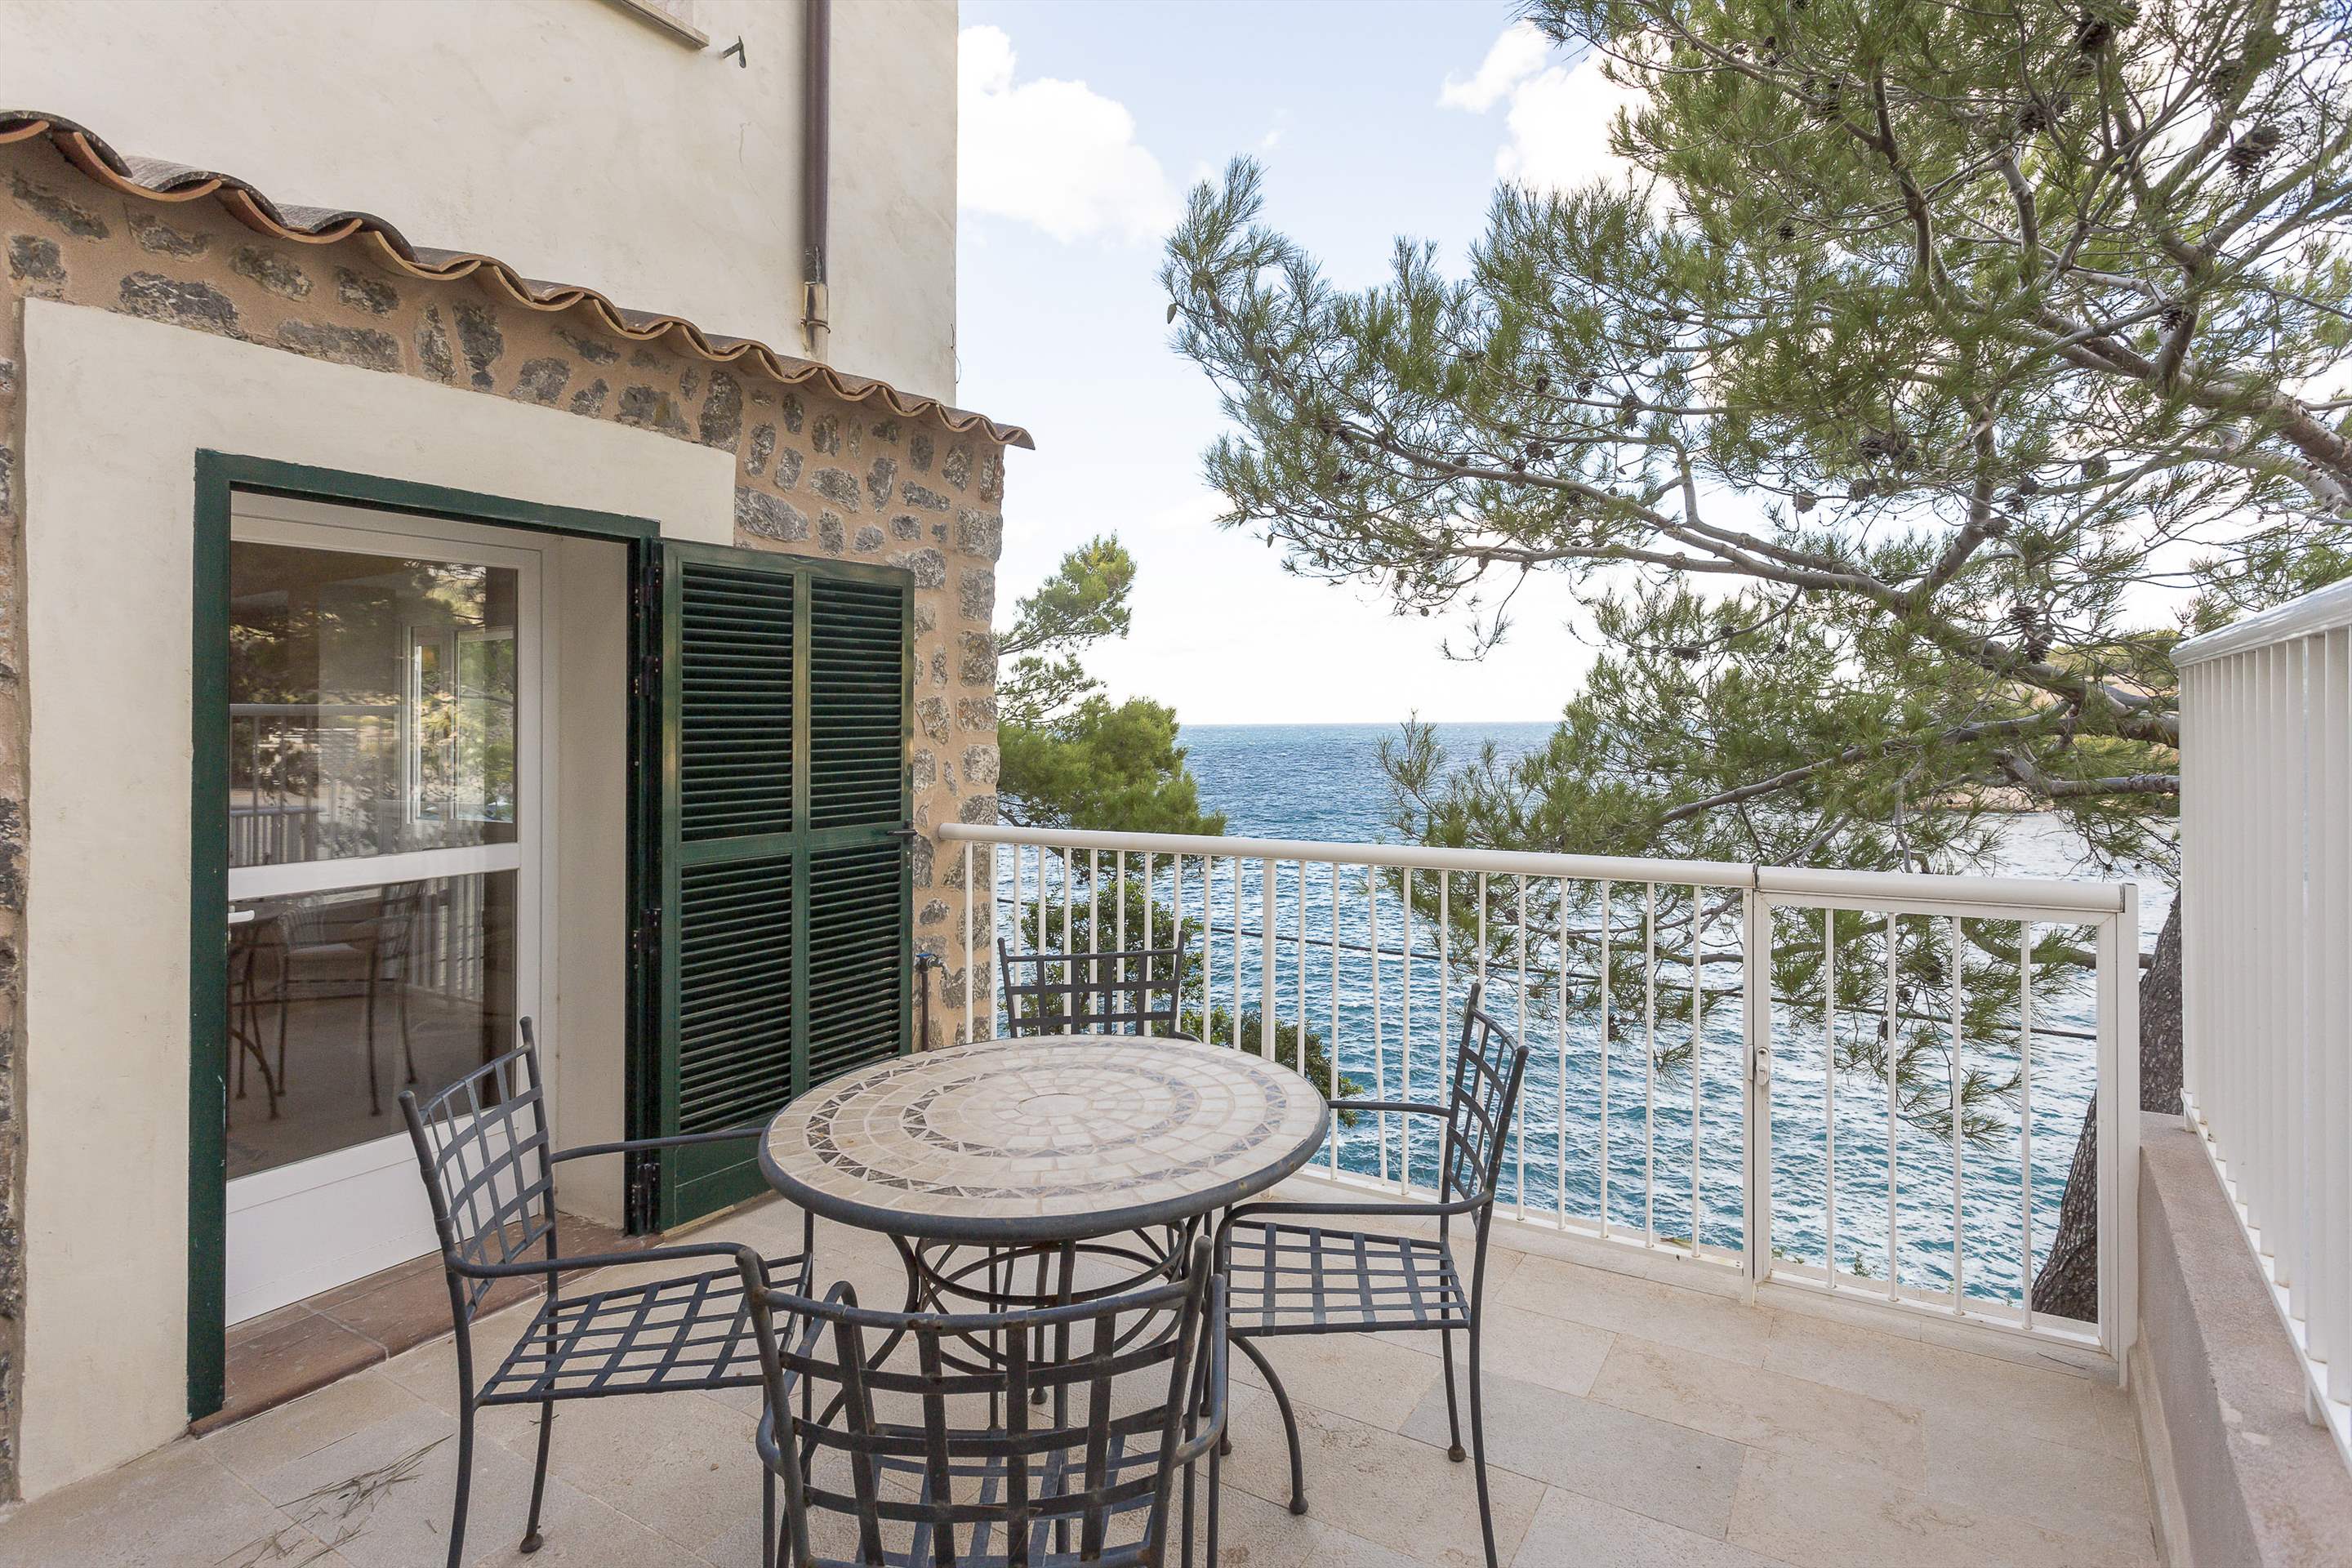 The Port House Up to 8 Persons, 4 bedroom villa in Soller & Deia, Majorca Photo #26